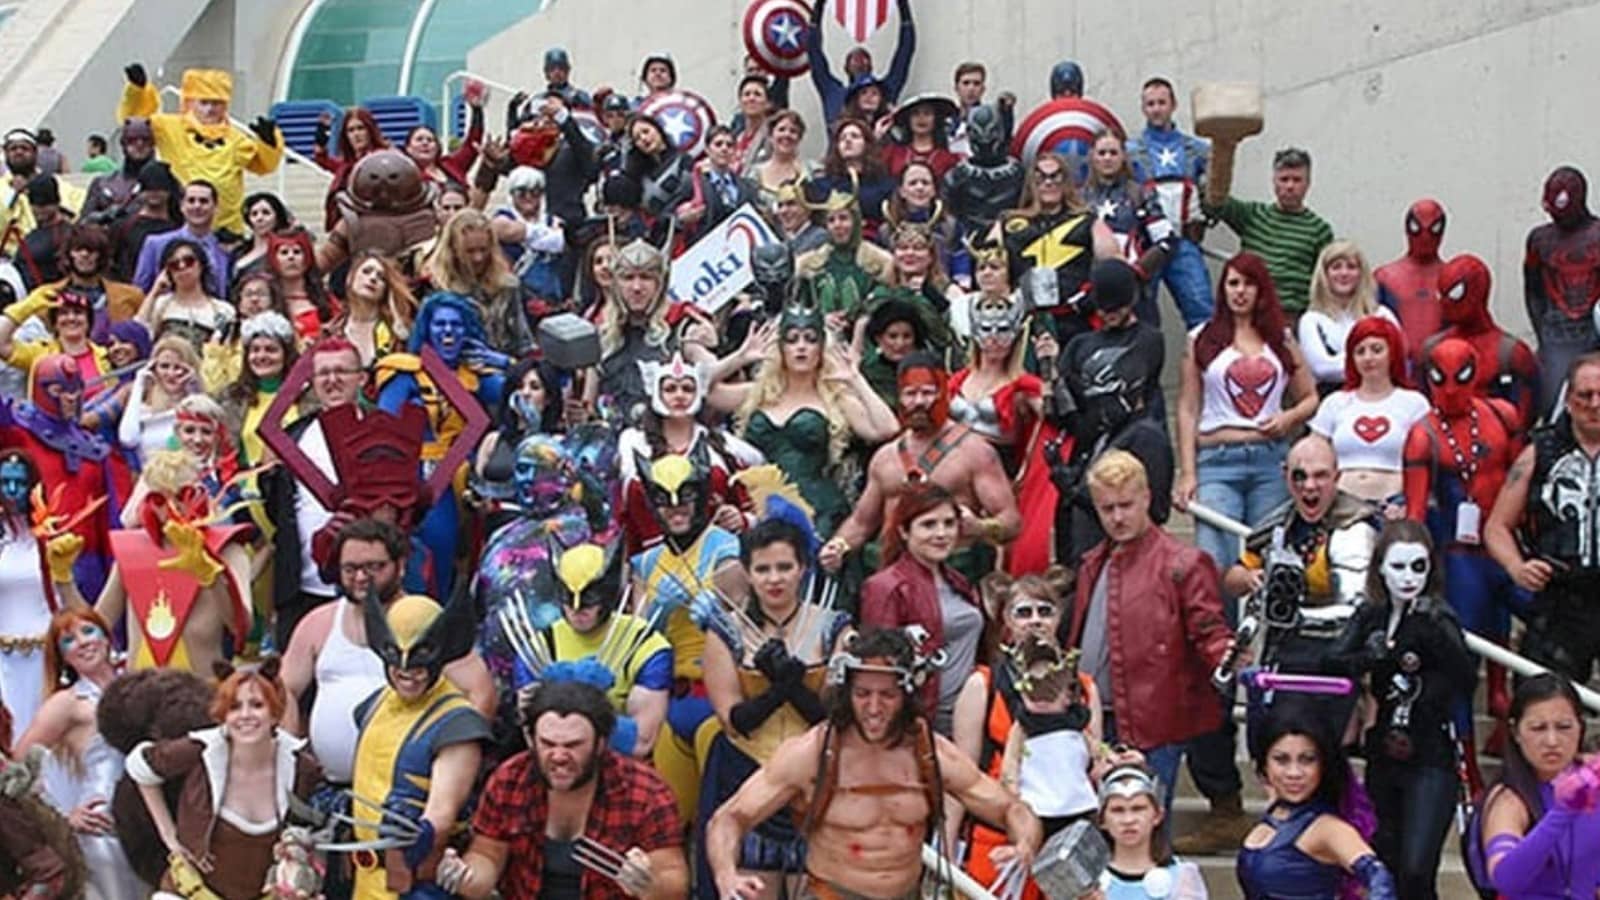 An image of Cosplayers at San Diego Comic-Con